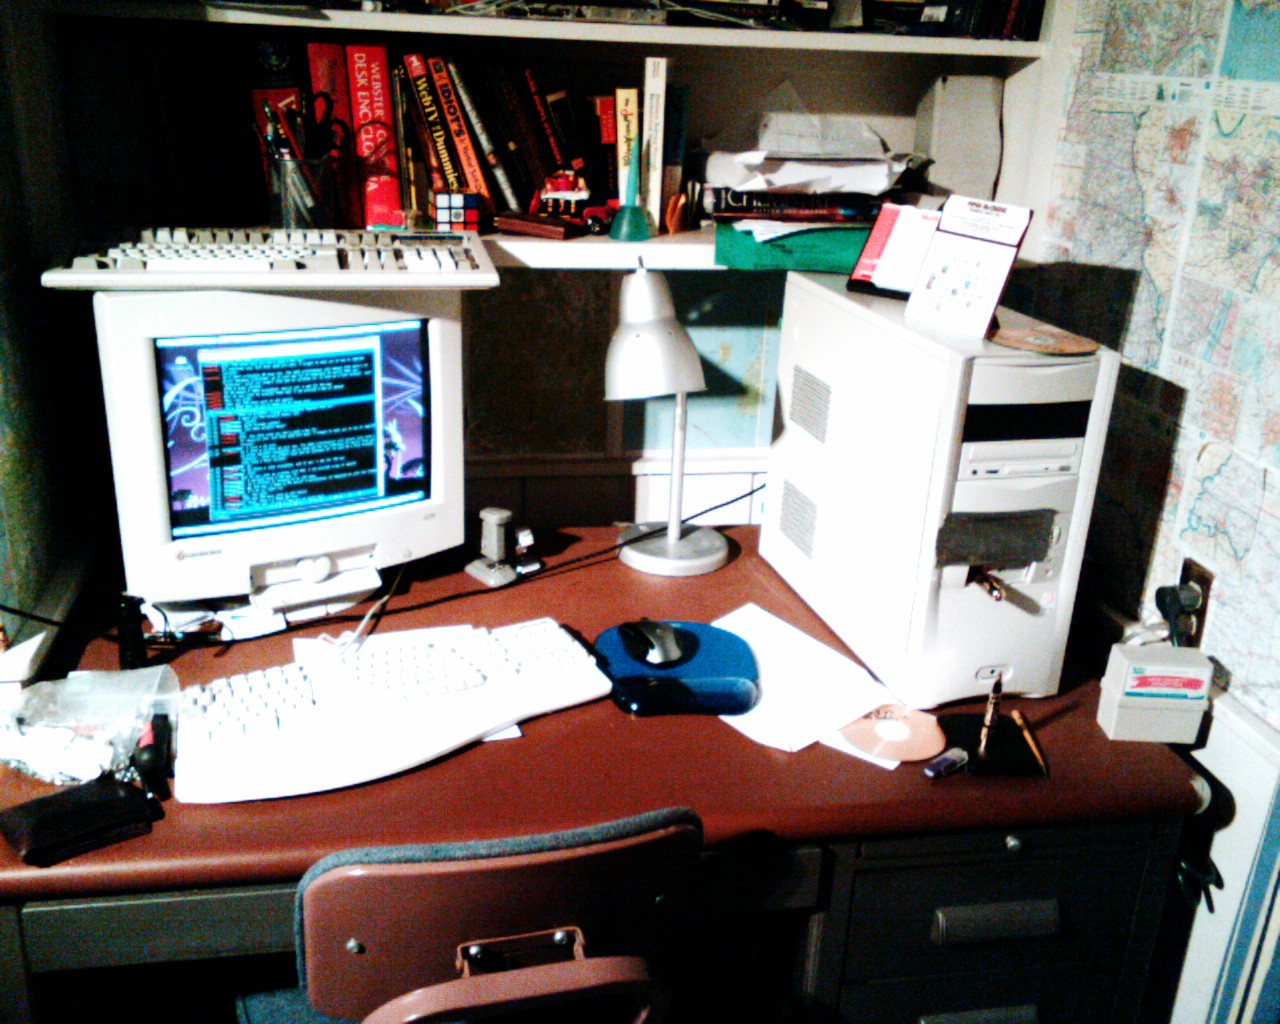 a desk has a computer monitor, keyboard, mouse, books and lamp on it